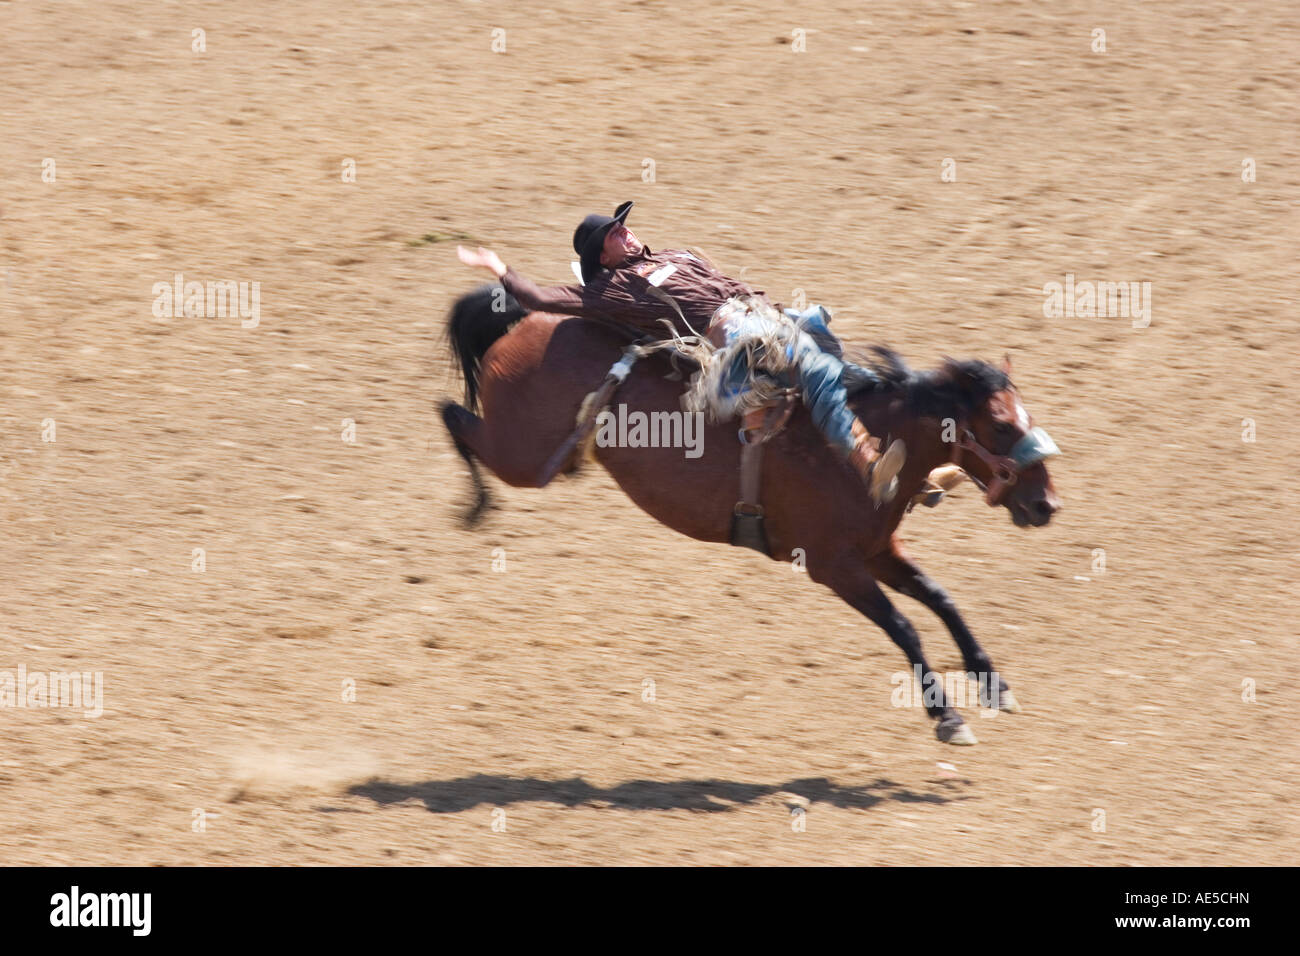 Cowboy riding a bucking horse being thrown back as the horse jumps forward at the California Salinas Rodeo Stock Photo